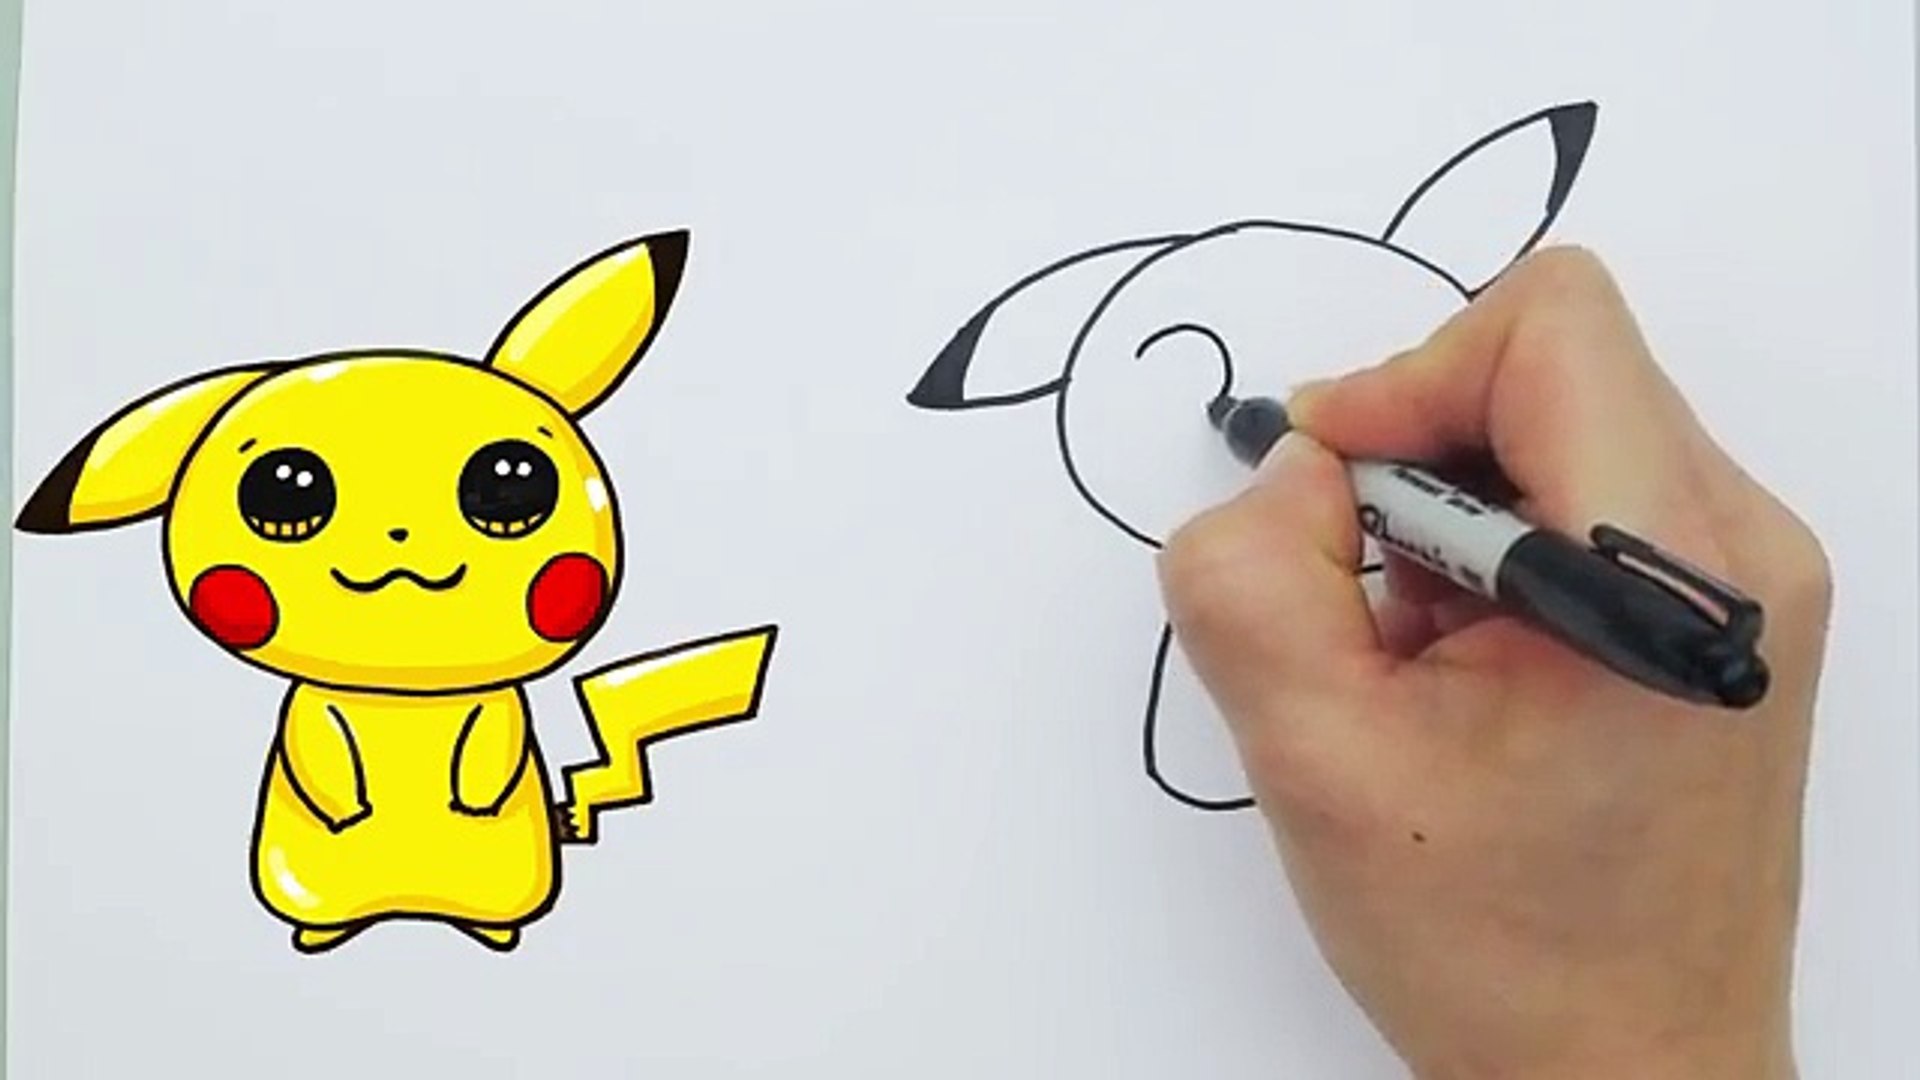 Pikachu Drawing With Hat Clashing Pride